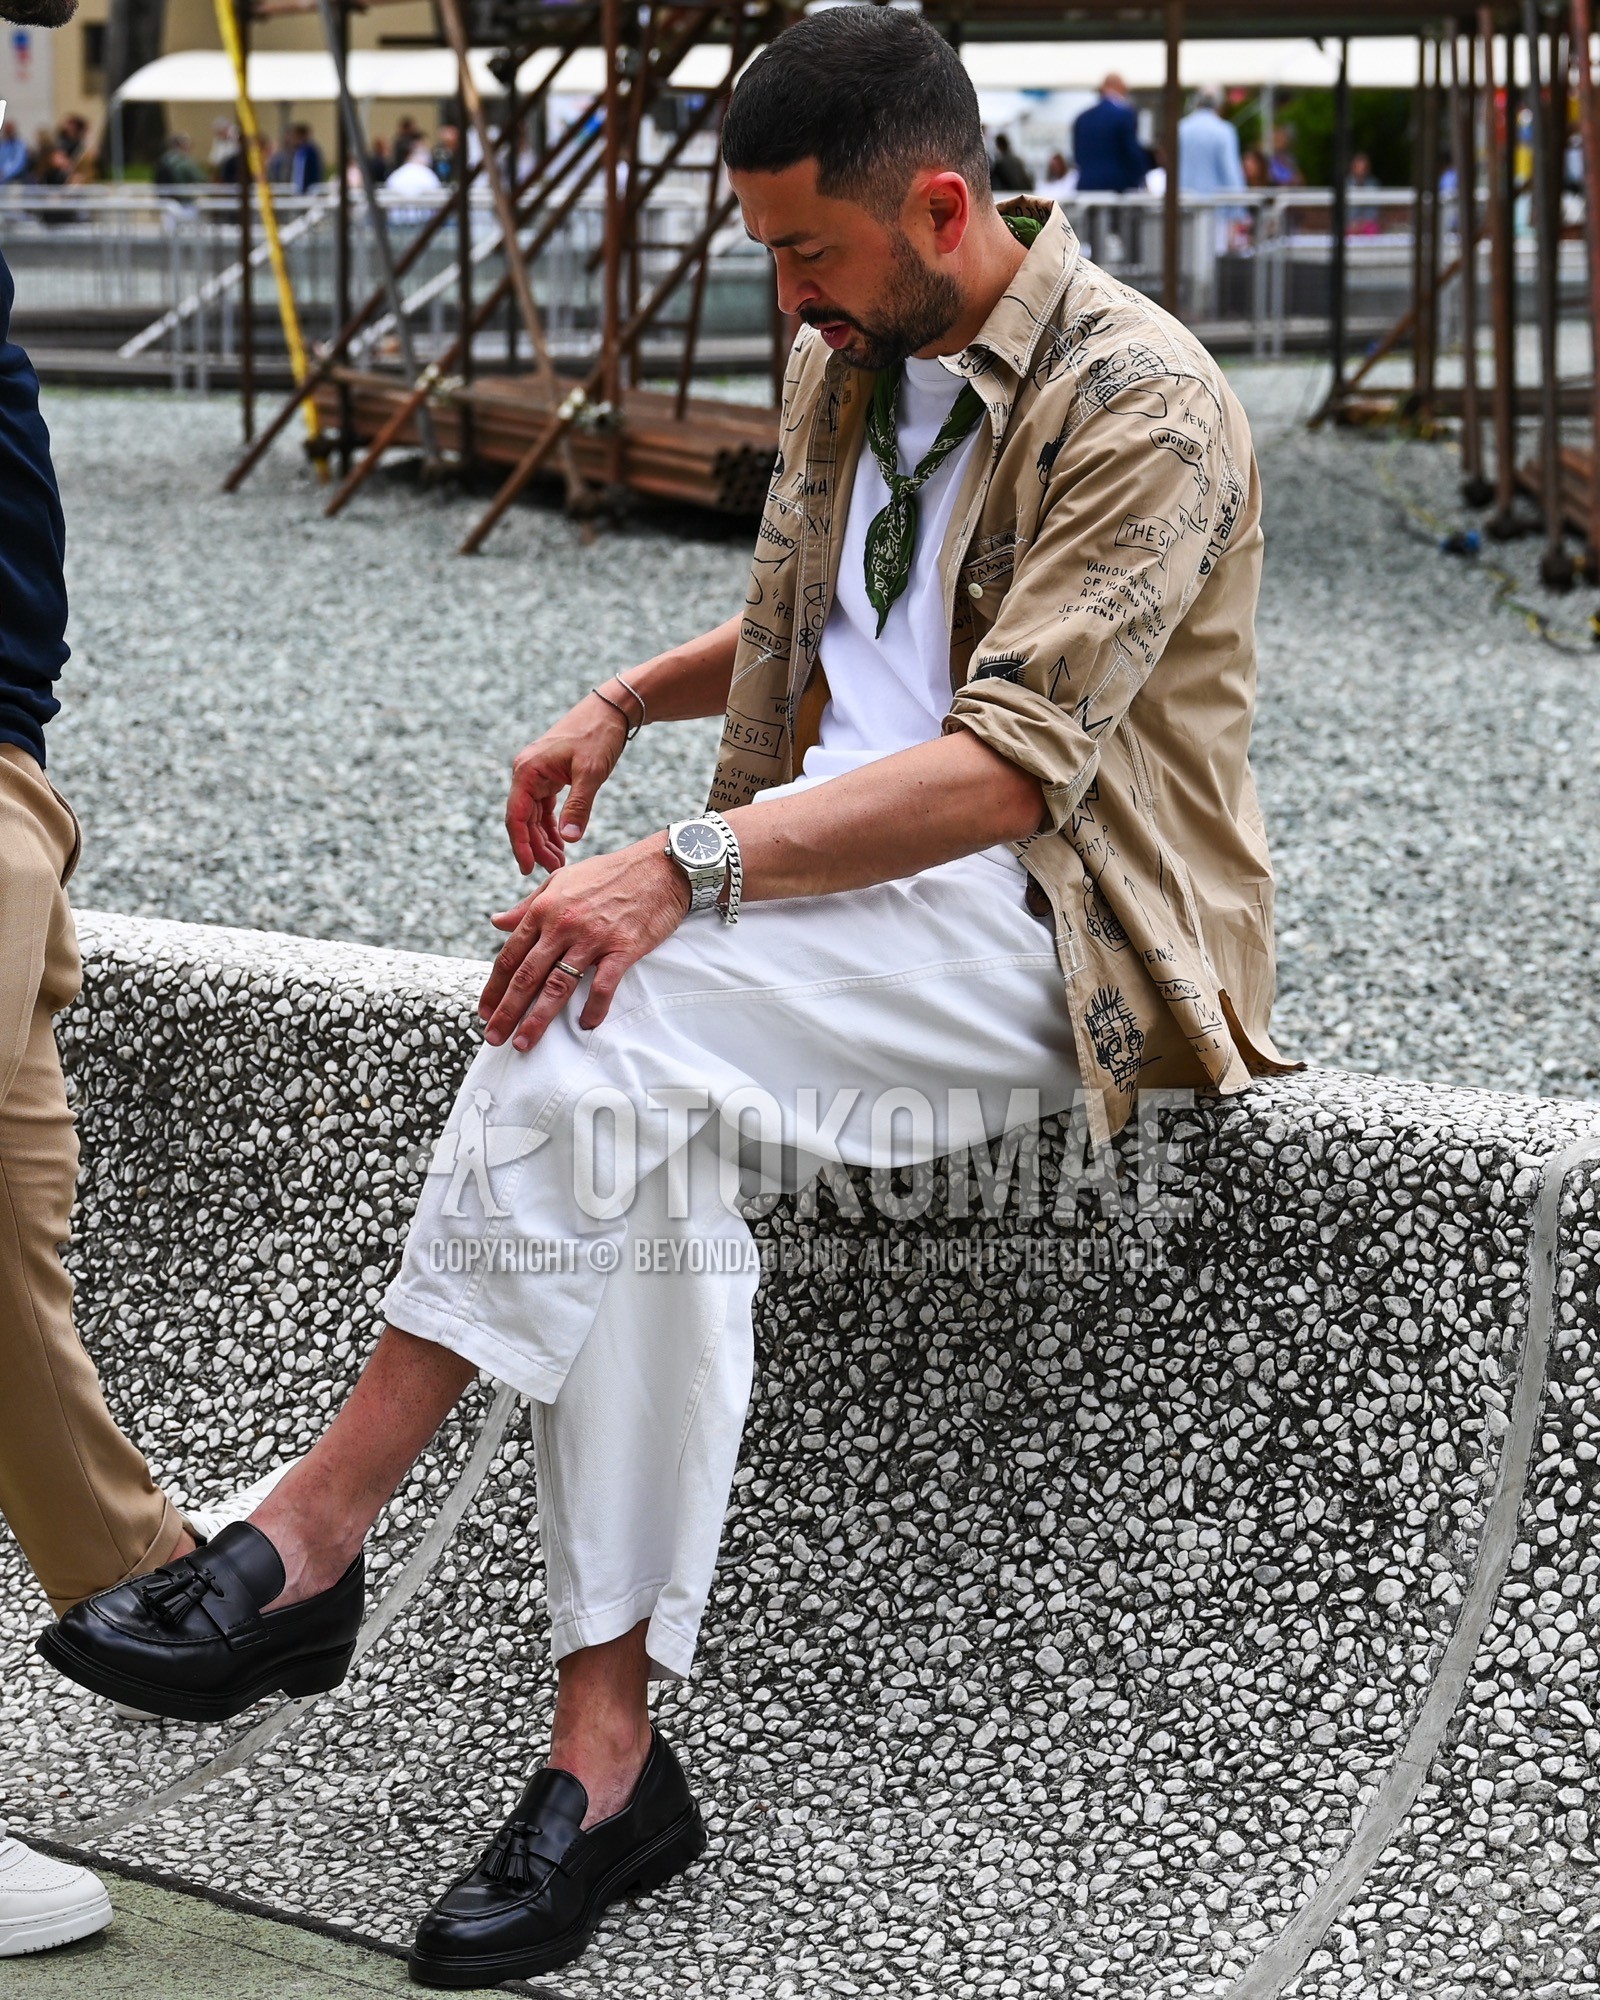 Men's spring summer autumn outfit with black whole pattern bandana/neckerchief, beige whole pattern outerwear, white plain t-shirt, white plain chinos, black tassel loafers leather shoes.